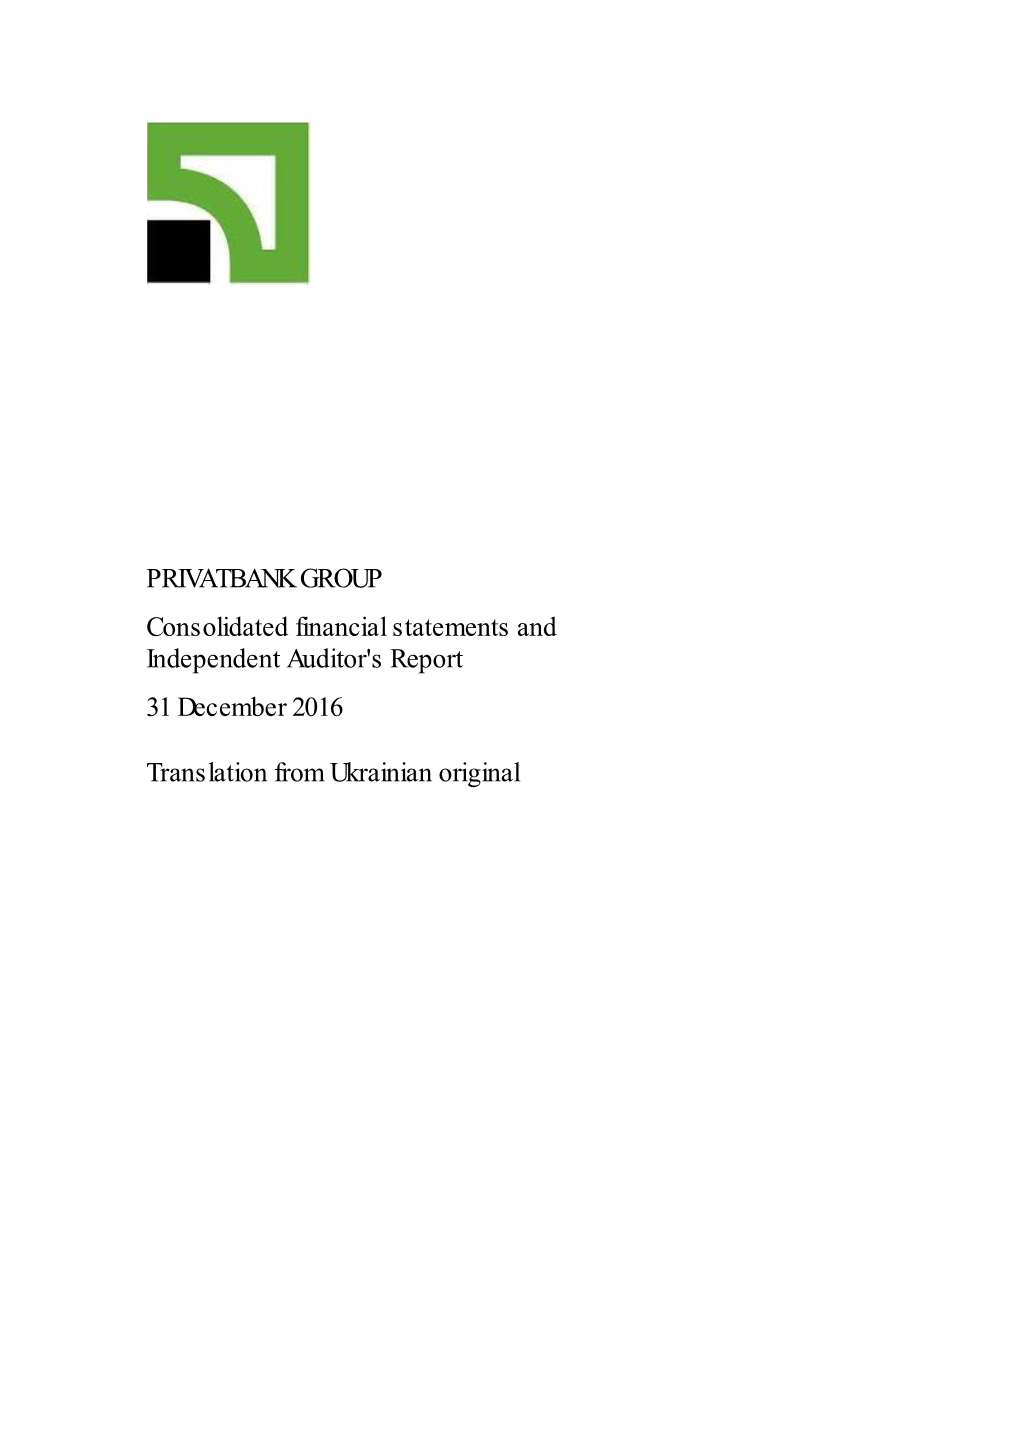 PRIVATBANK GROUP Consolidated Financial Statements and Independent Auditor's Report 31 December 2016